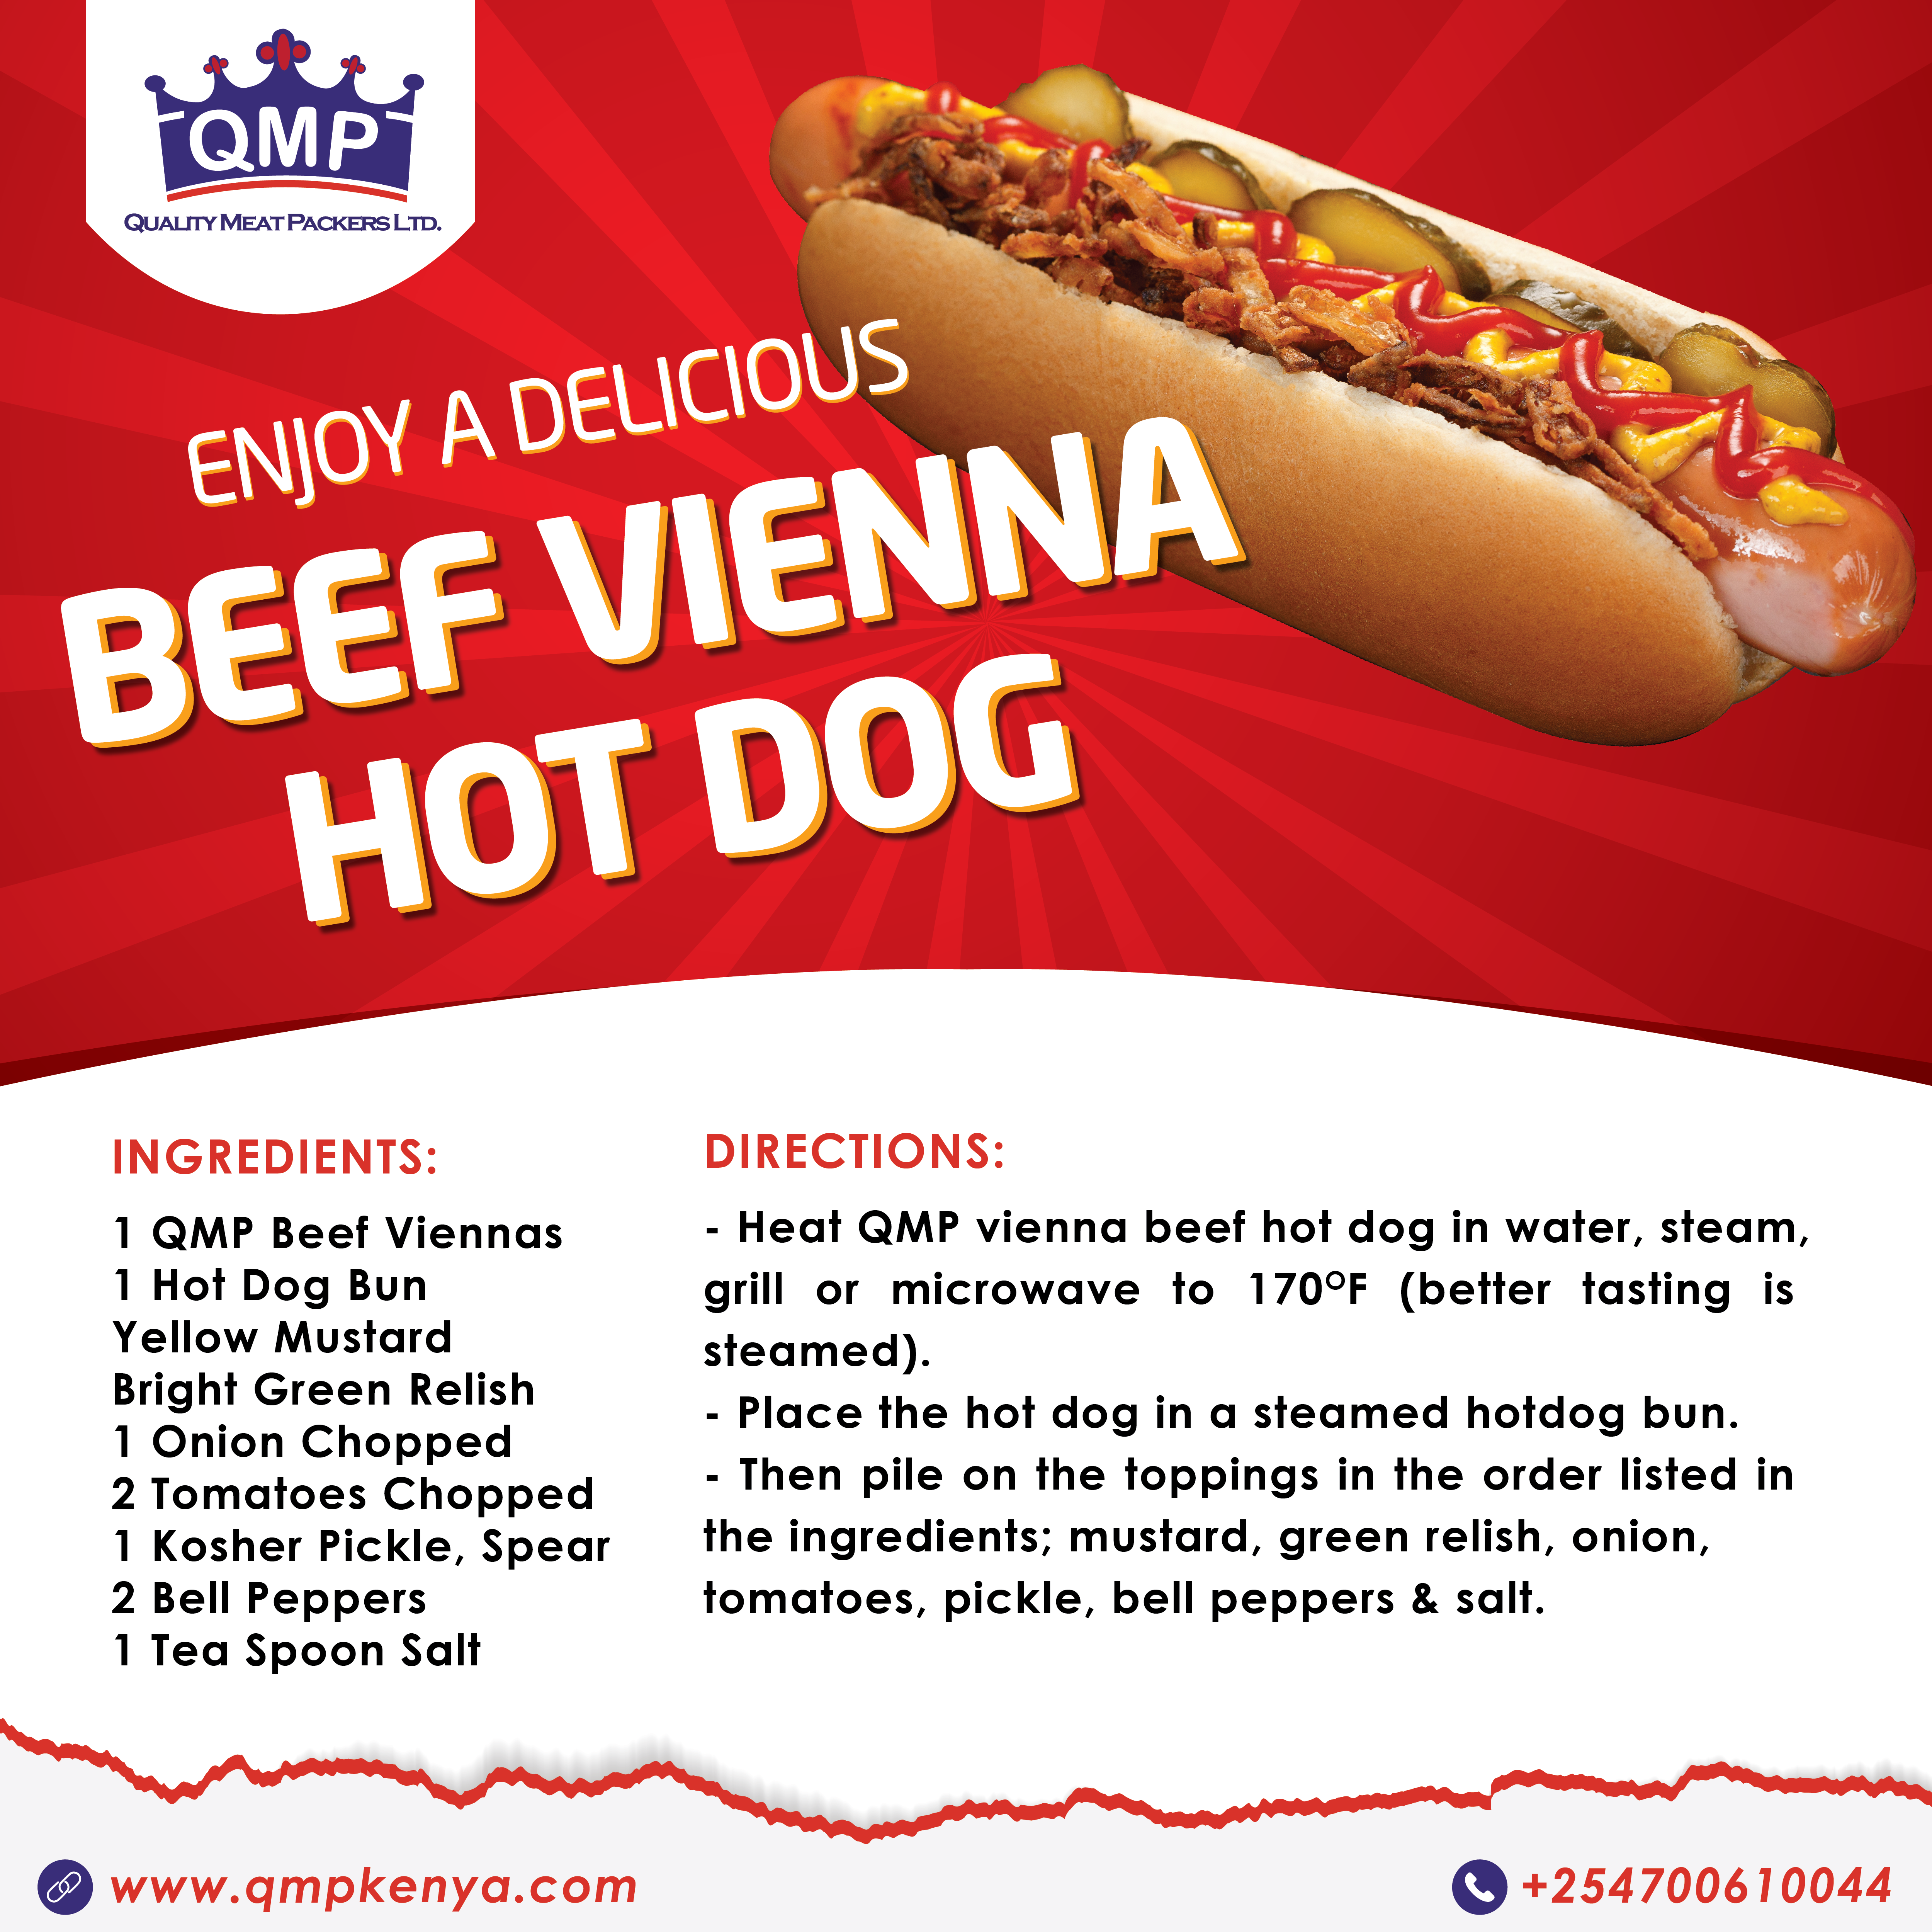 Enjoy a Delicious QMP Beef Vienna Hot Dog - Quality Meat Packers